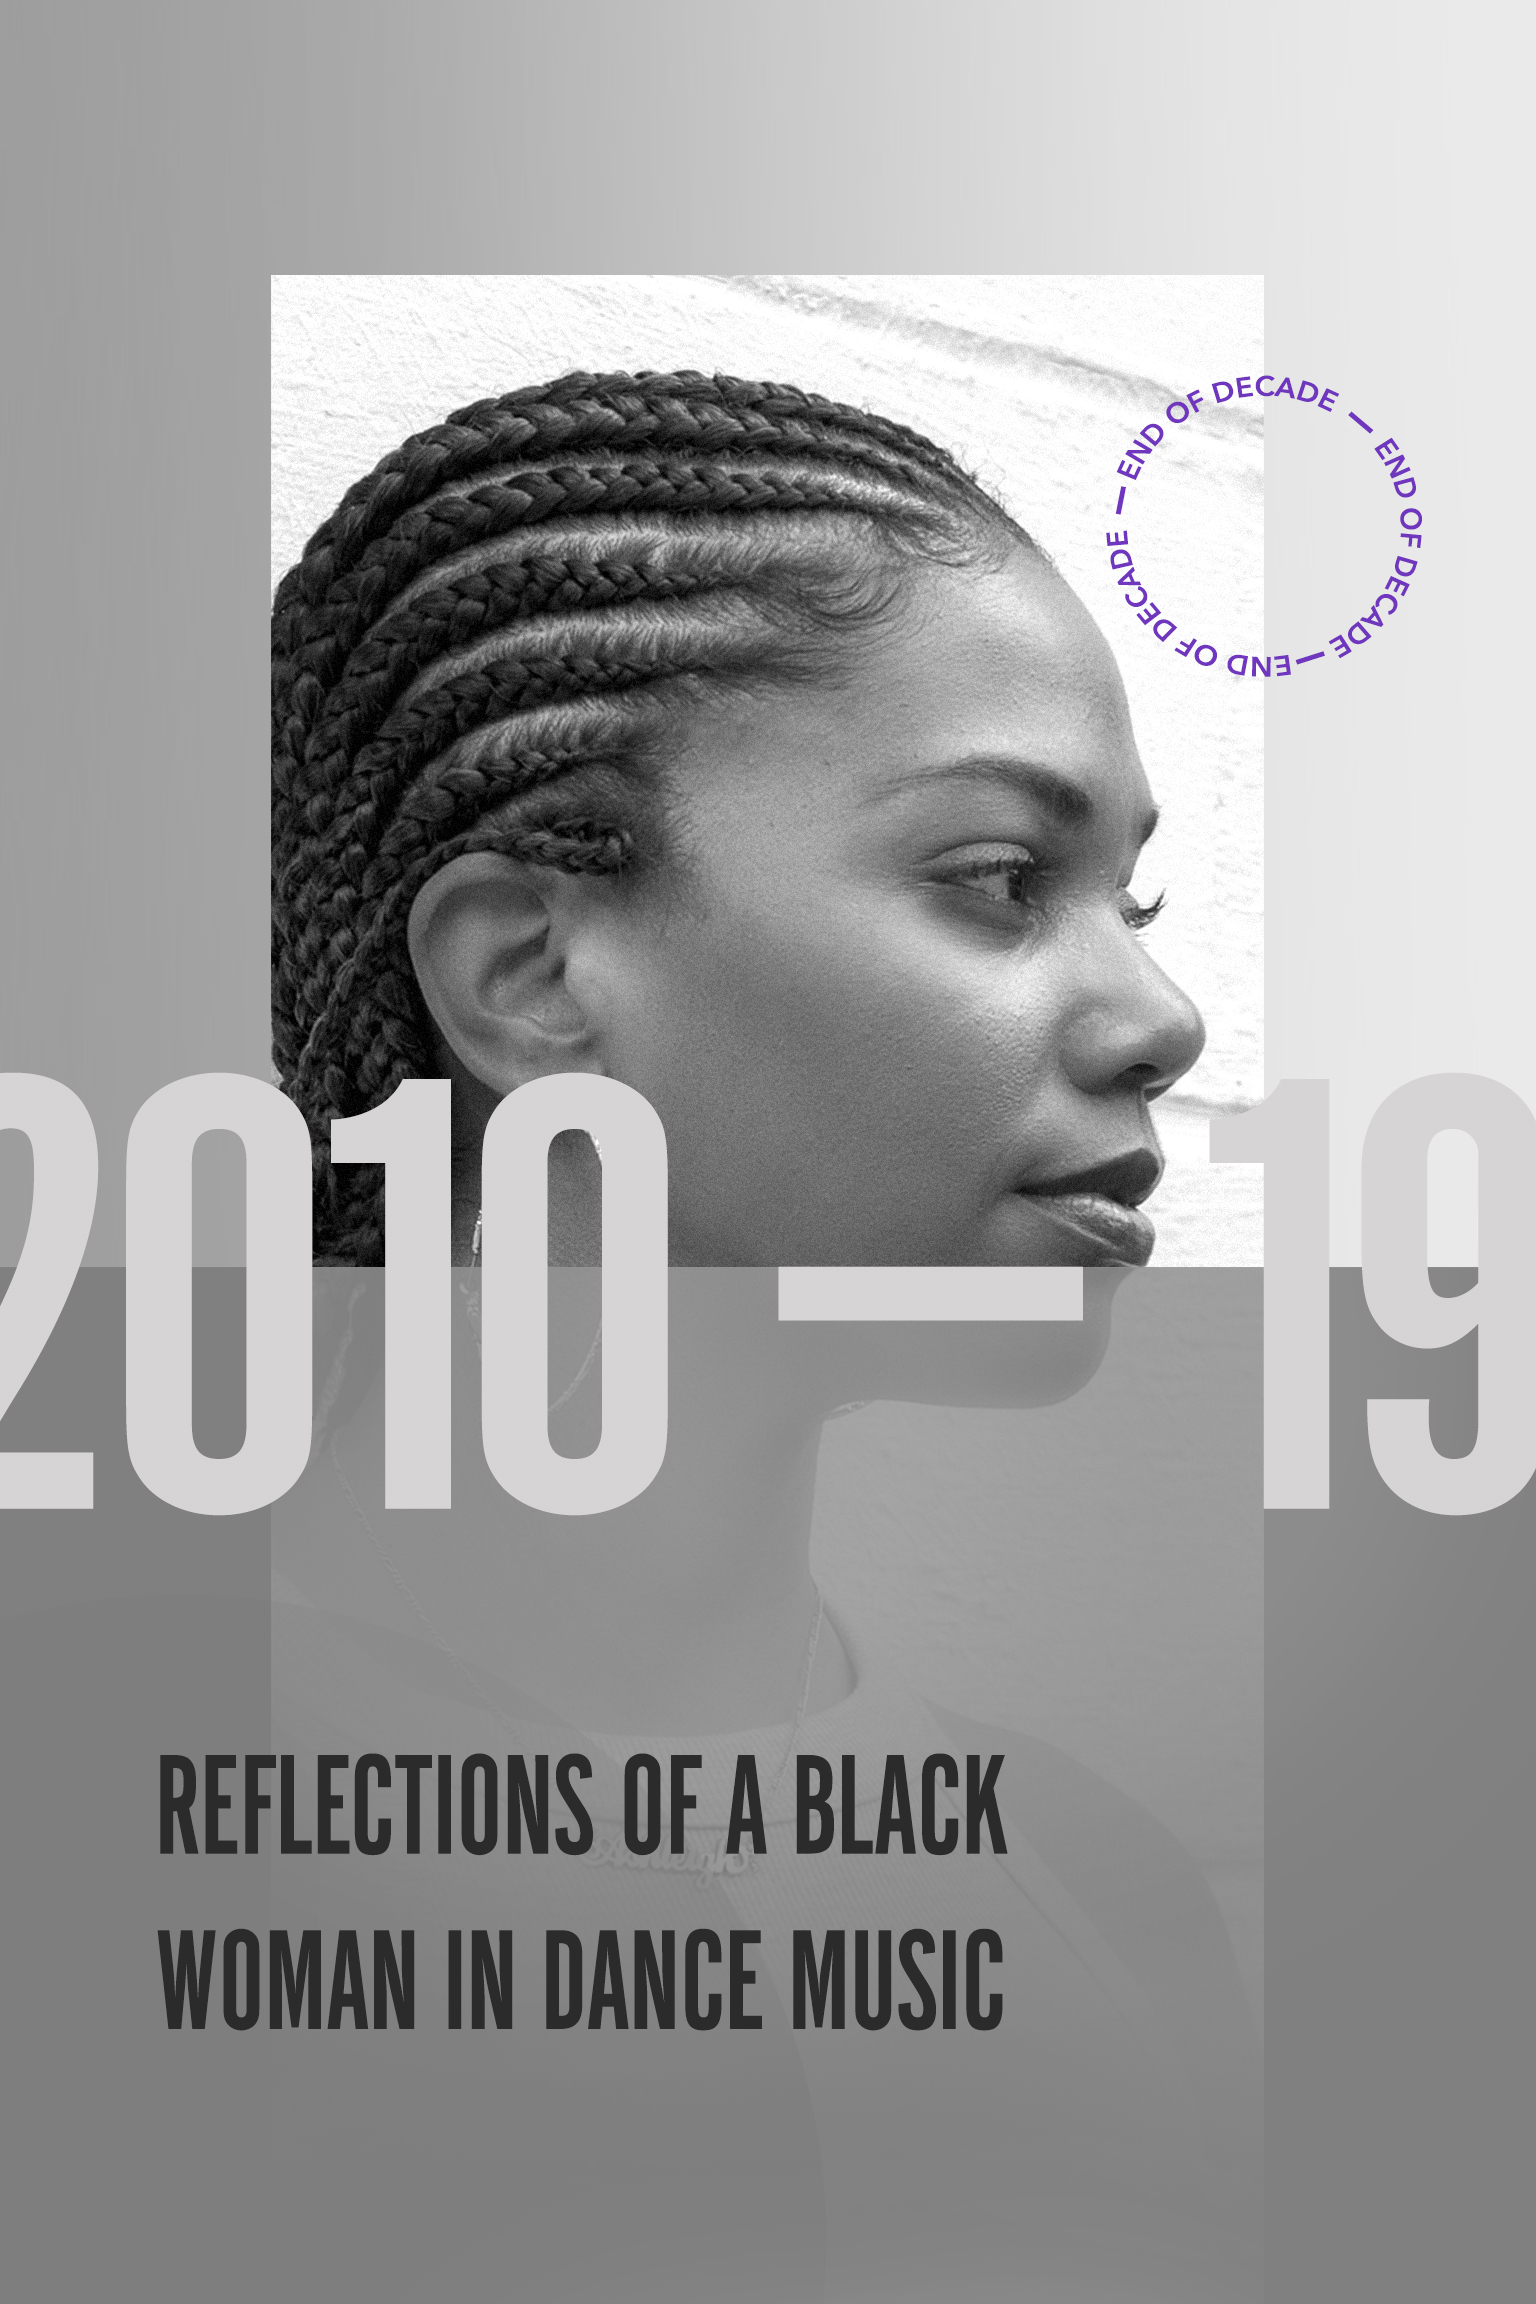 2010-19: Reflections Of A Black Woman In Dance Music